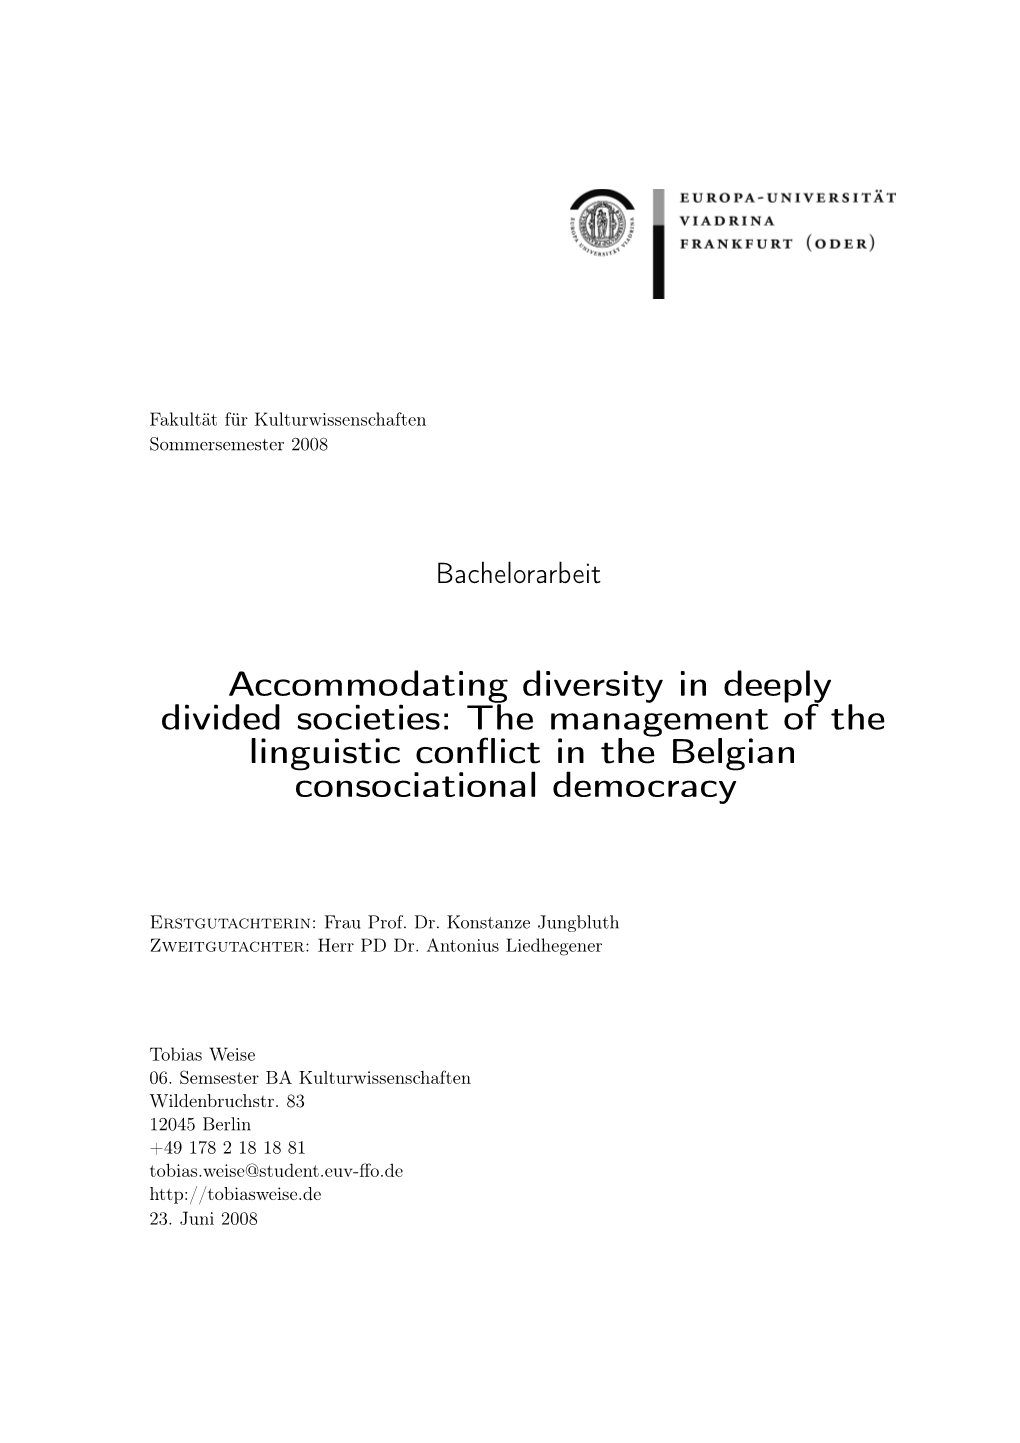 Accommodating Diversity in Deeply Divided Societies: the Management of the Linguistic Conﬂict in the Belgian Consociational Democracy